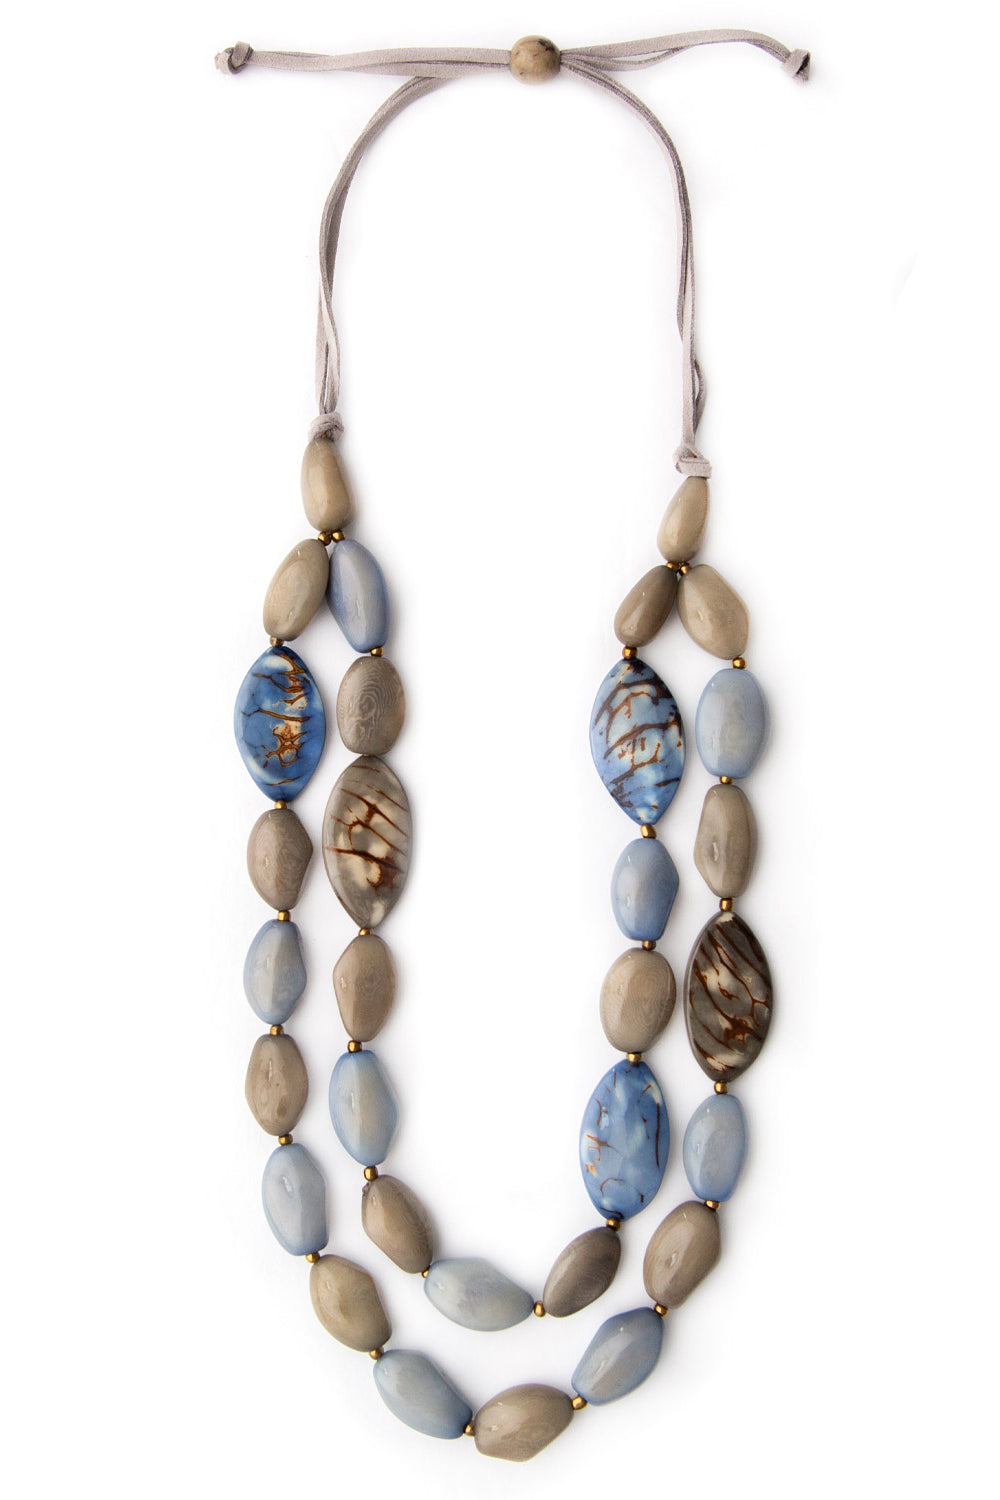 Organic Tague Jewellery - Jannie Necklace - Blue and brown double strand chunky beaded necklace